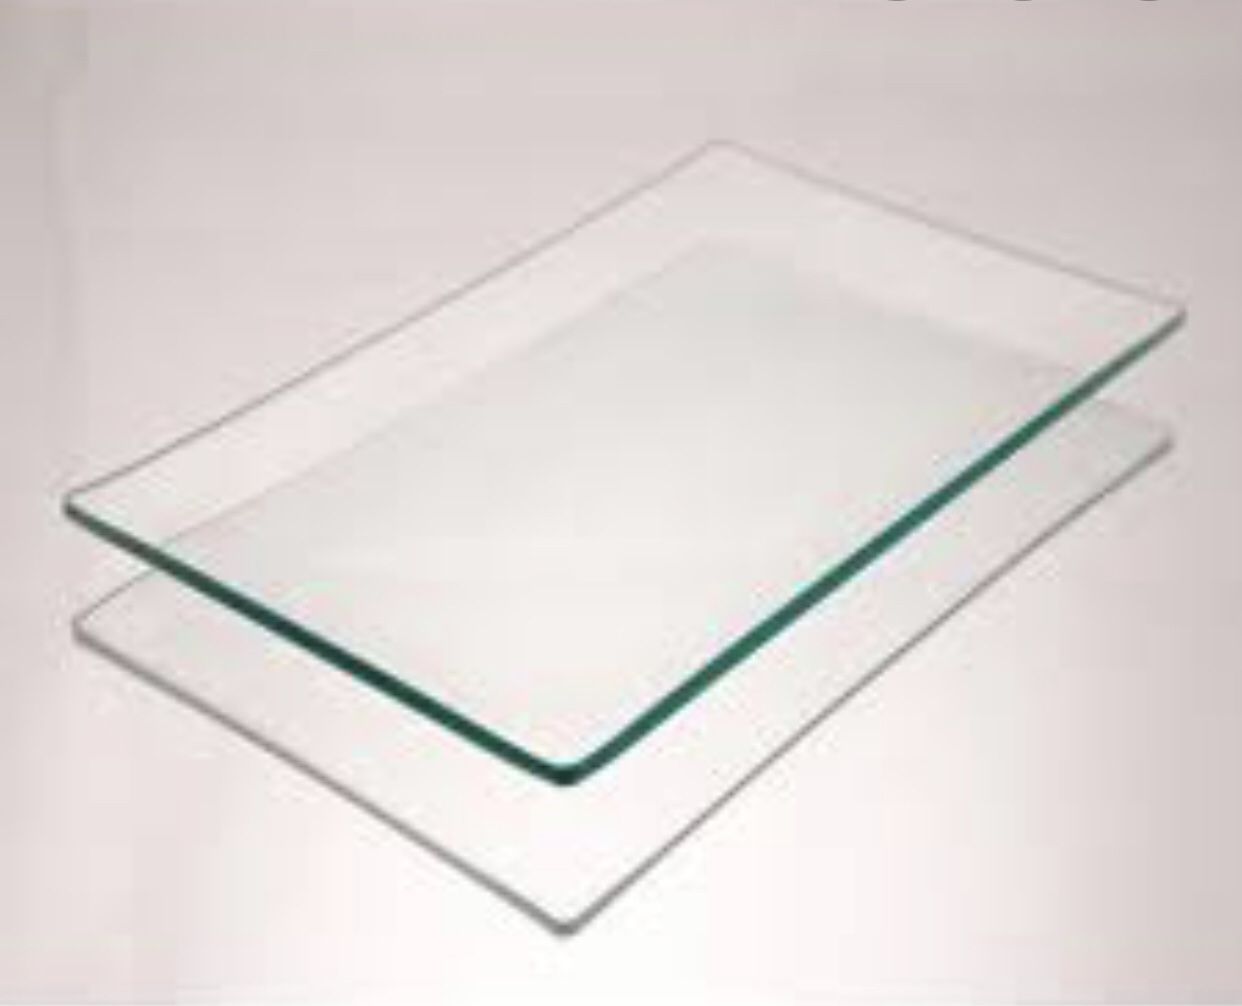 Glass for Sliding Door (Picture for reference only)